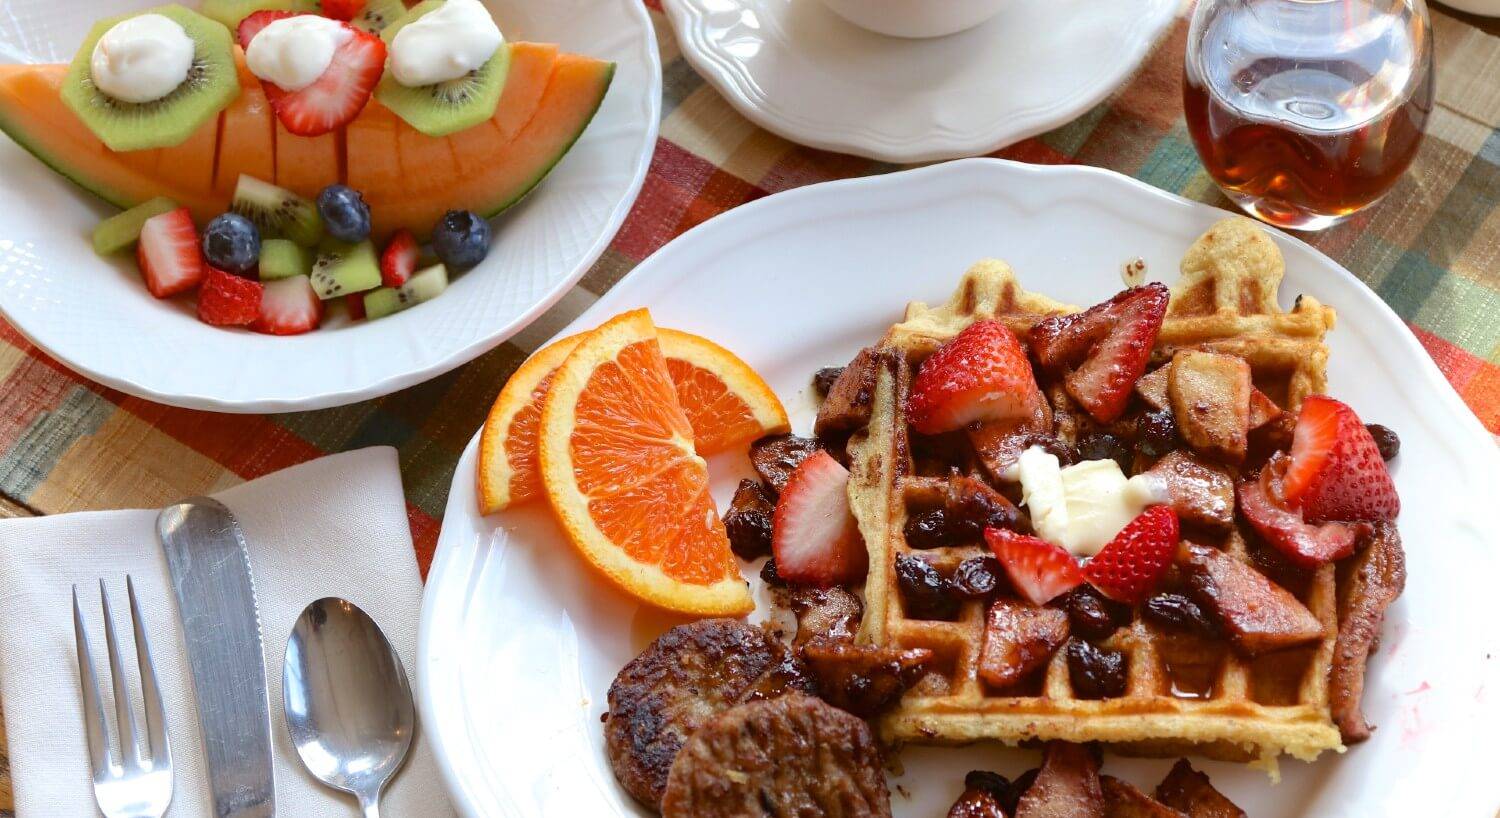 White plate with waffles covered in strawberries with sliced oranges and sausage patties